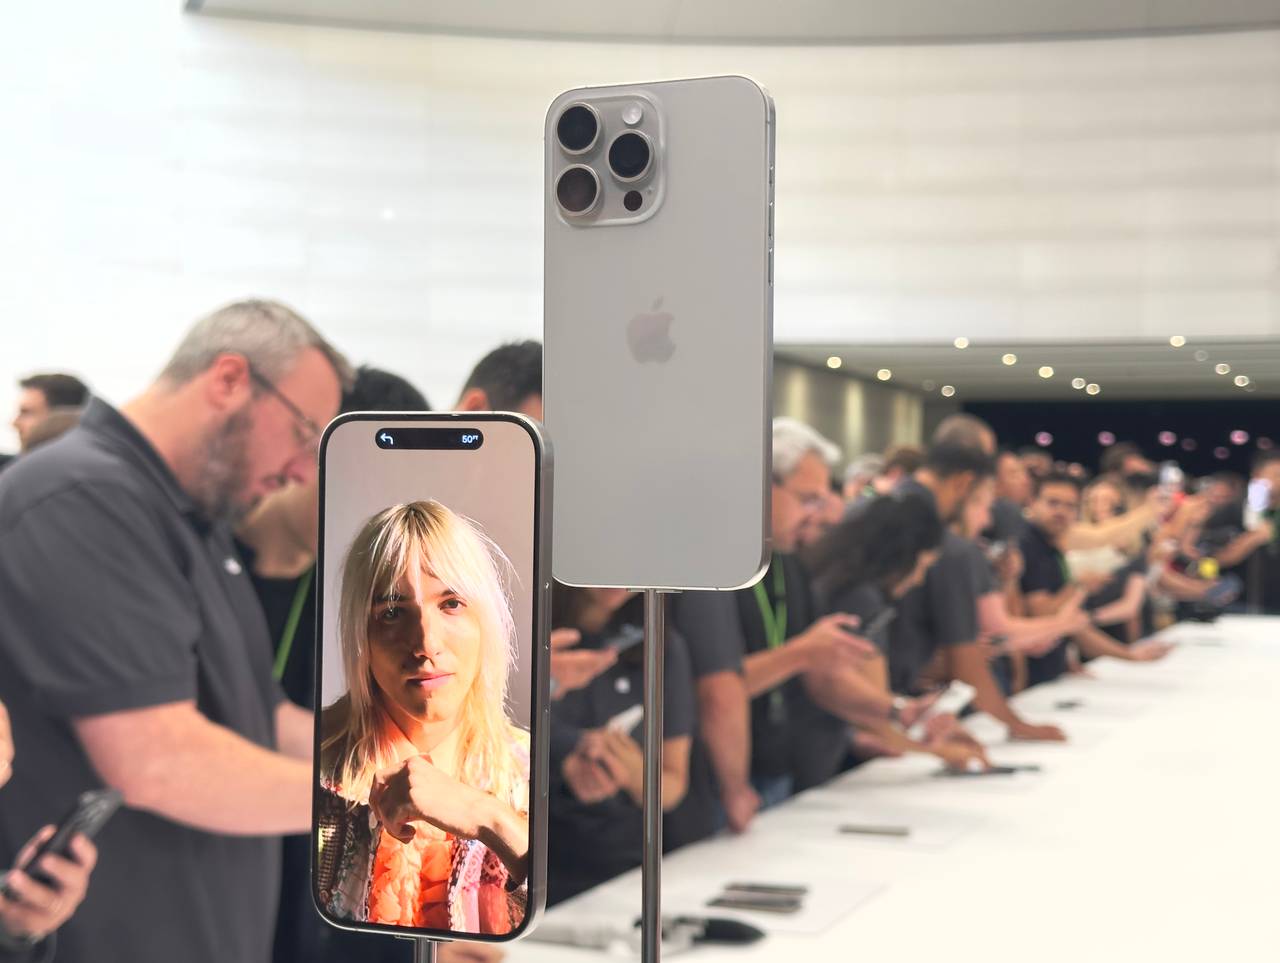 iPhone 15 Pro Max: 50 photos that show what the new camera system can do